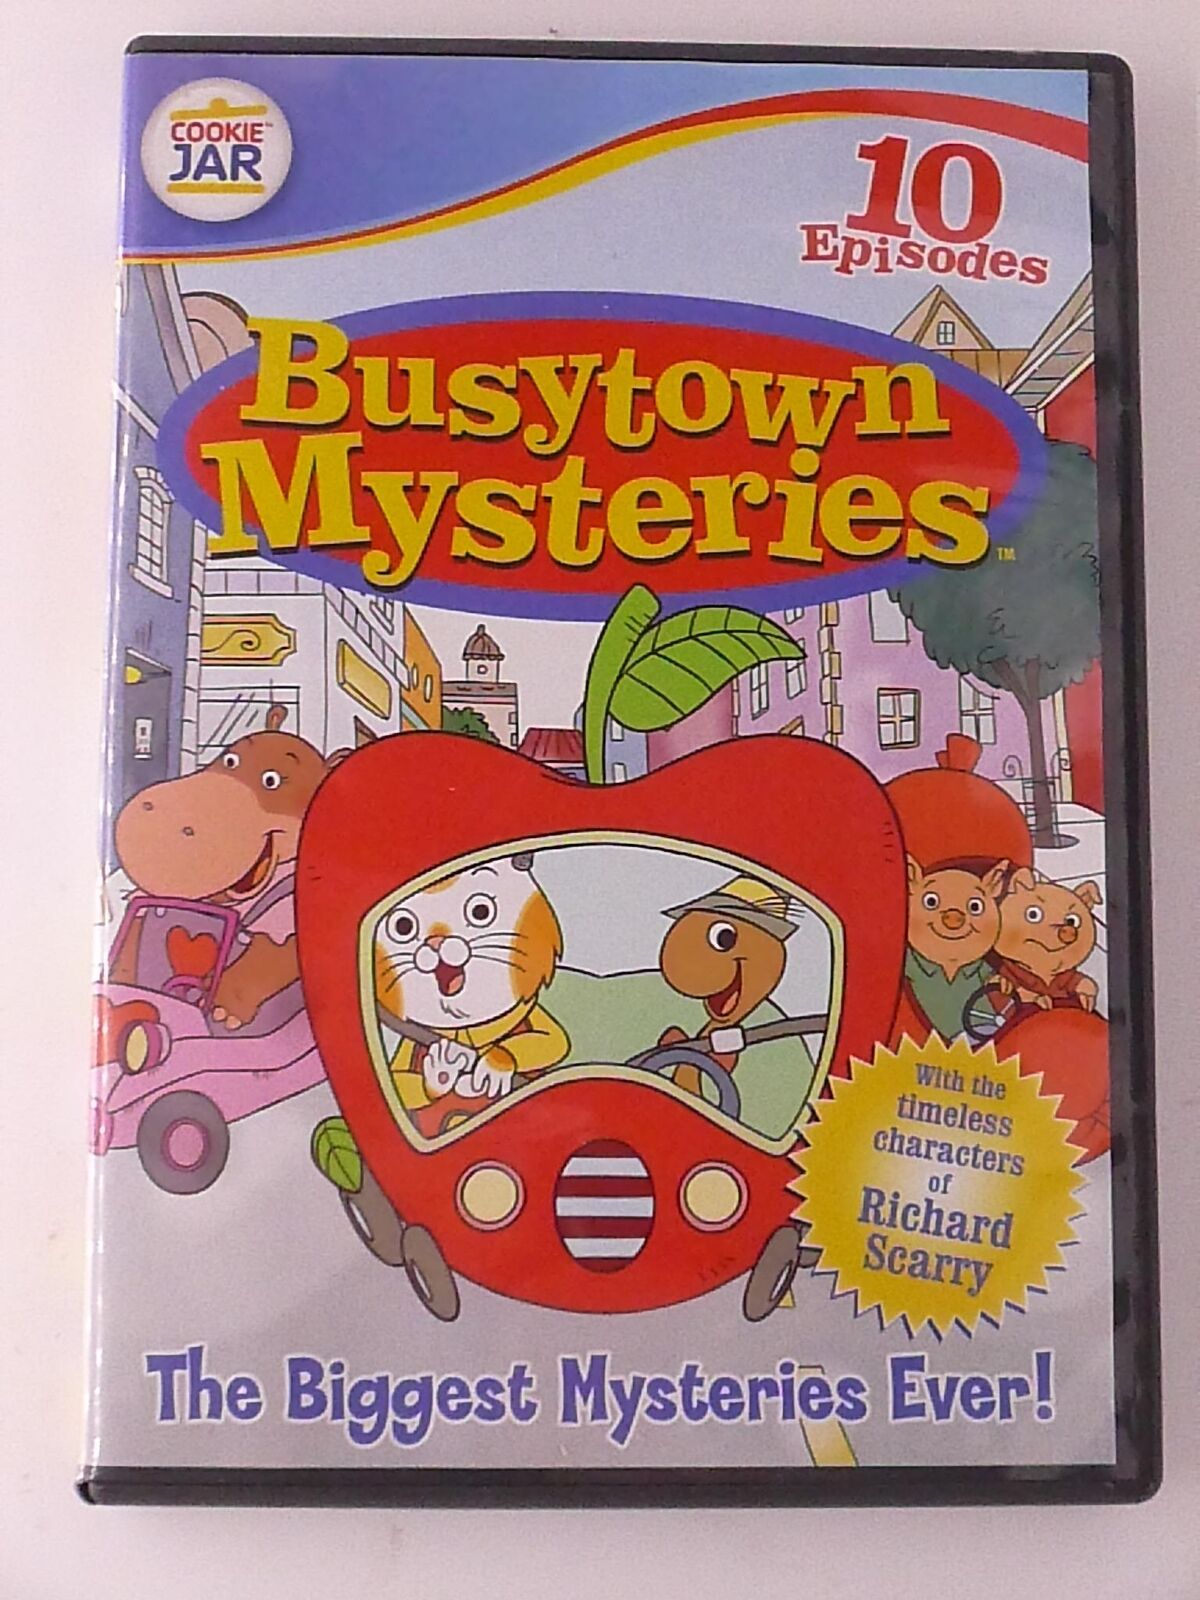 Busytown Mysteries - The Biggest Mysteries Ever (DVD, 10 episodes) - J0514